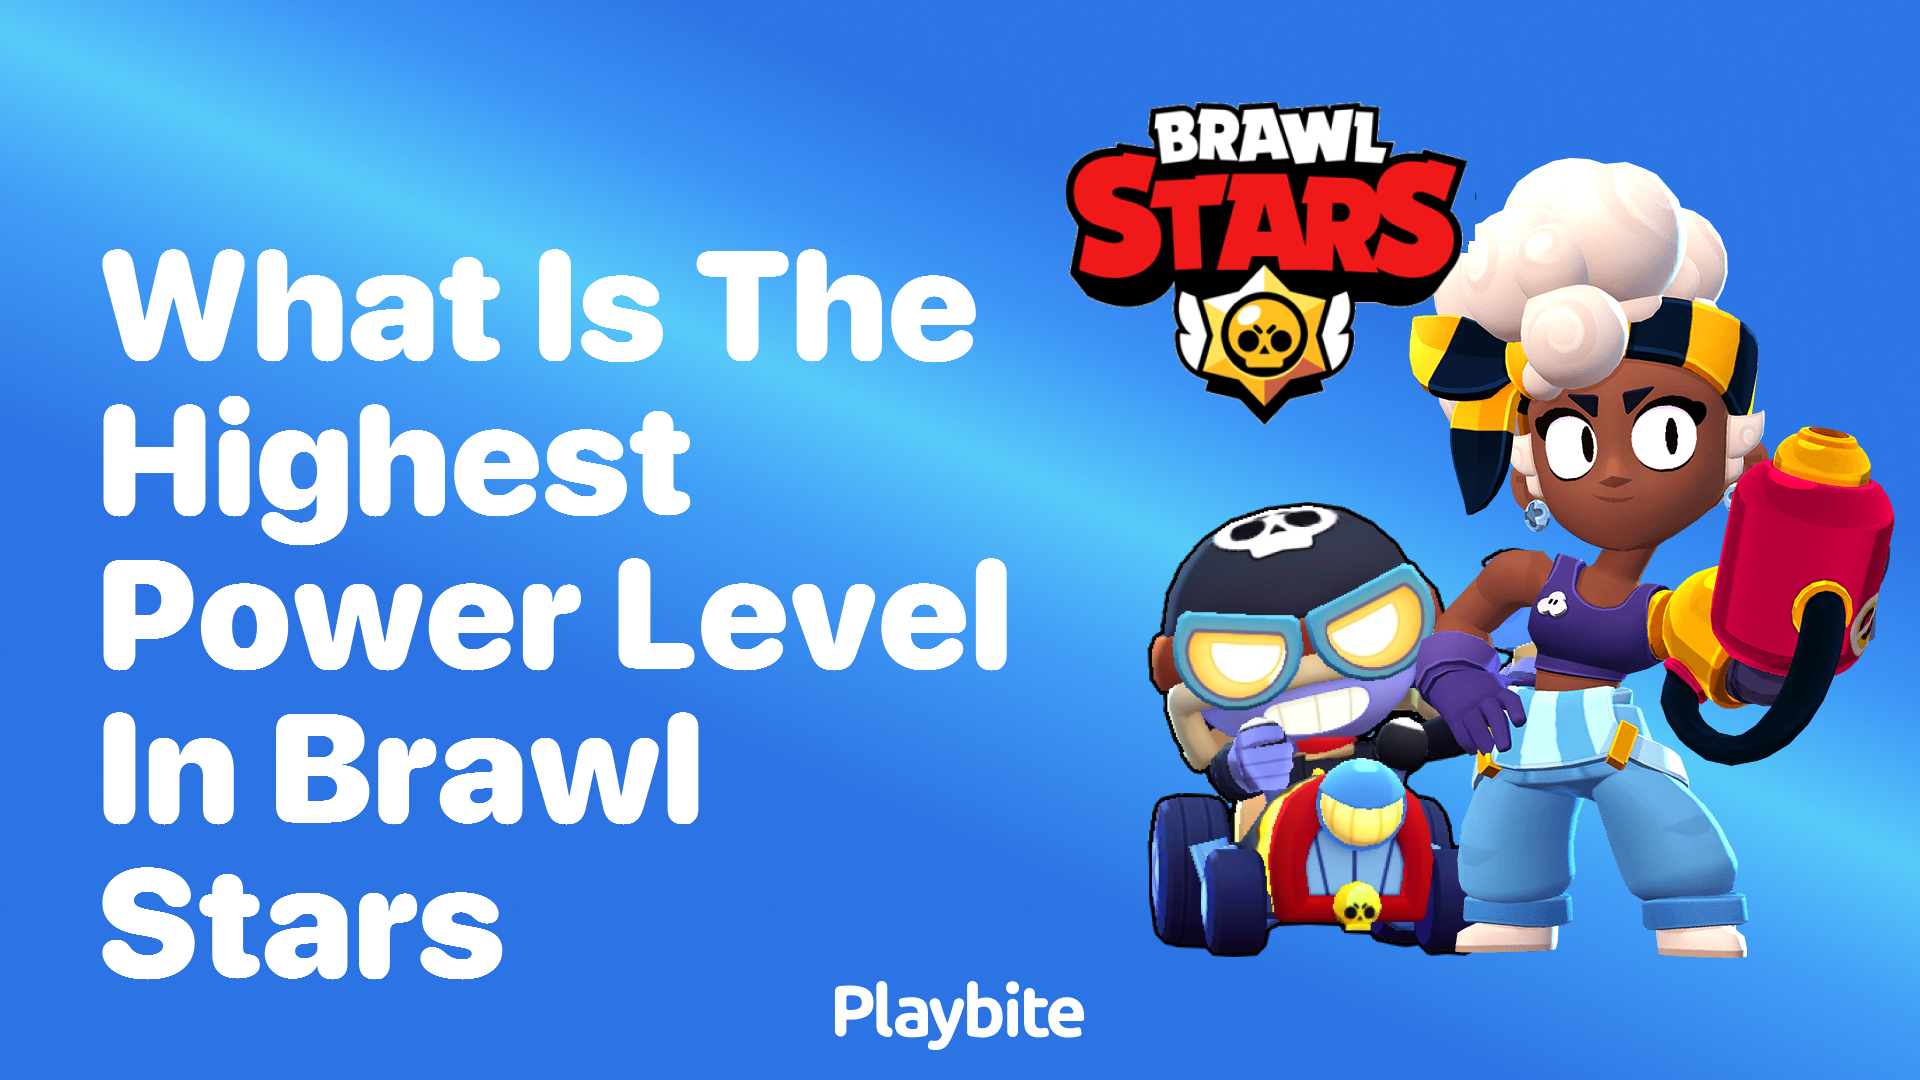 What Is the Highest Power Level in Brawl Stars?